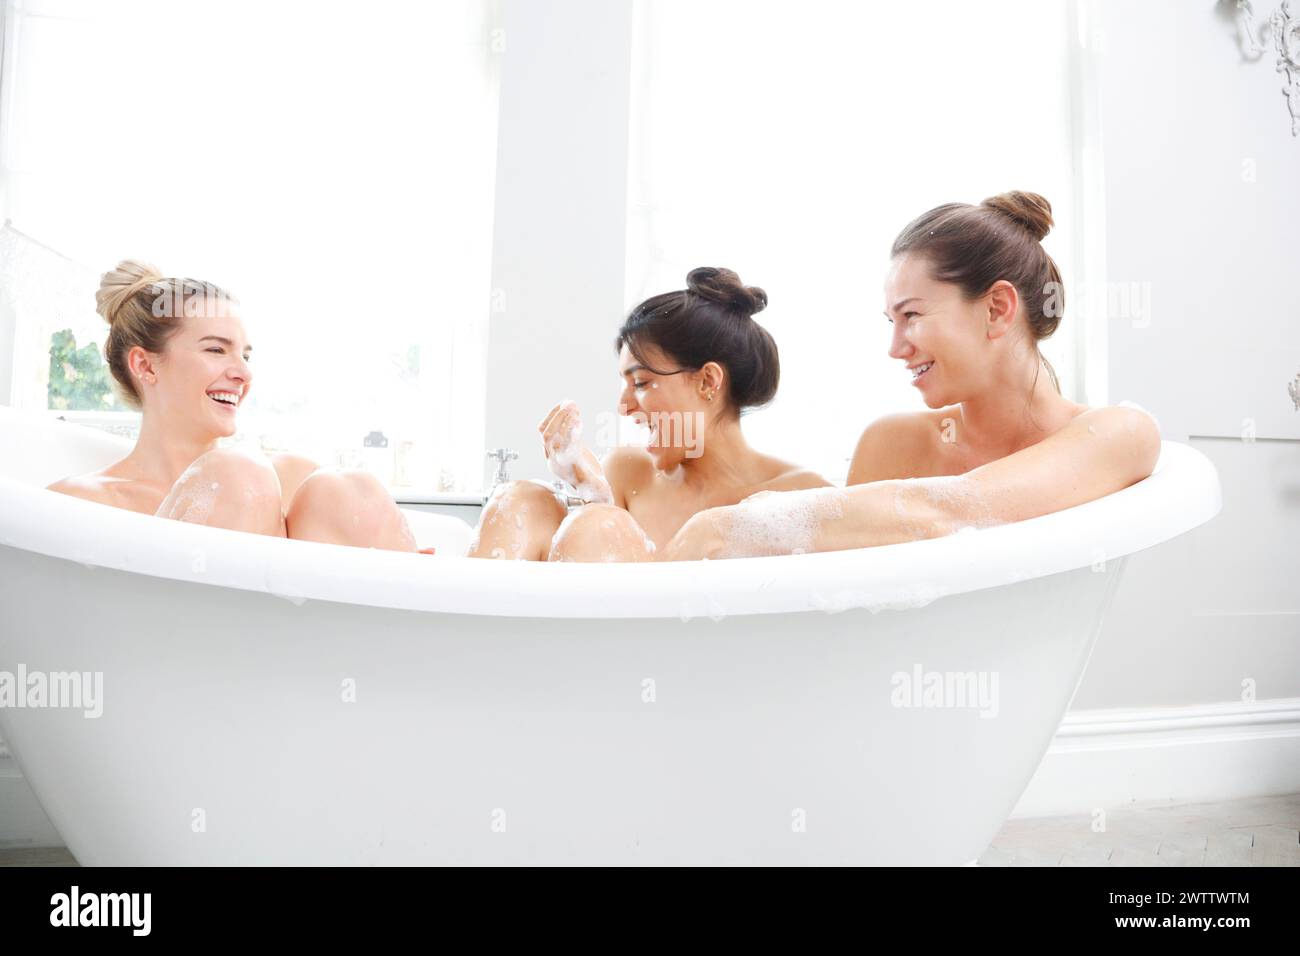 Three women laughing in a bubble bath Stock Photo